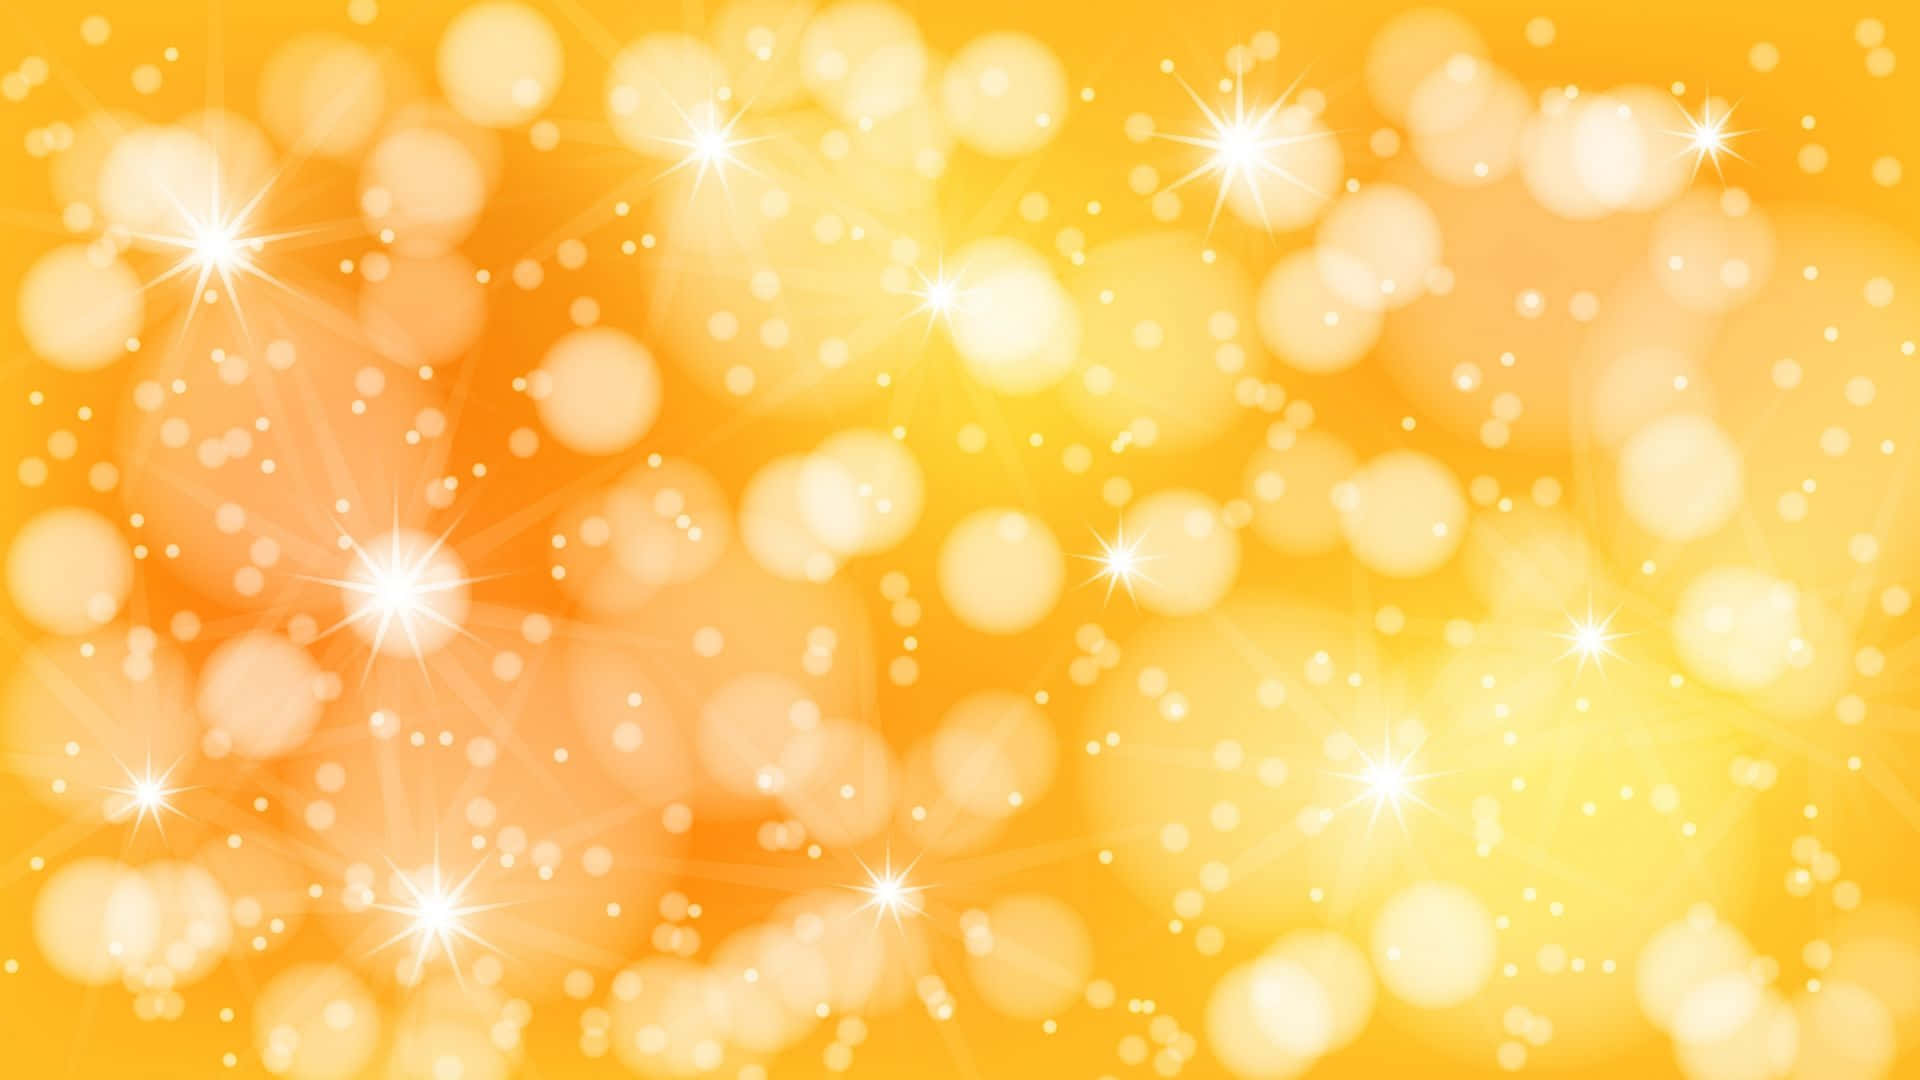 Add a pop of yellow to your life with Yellow Glitter Wallpaper